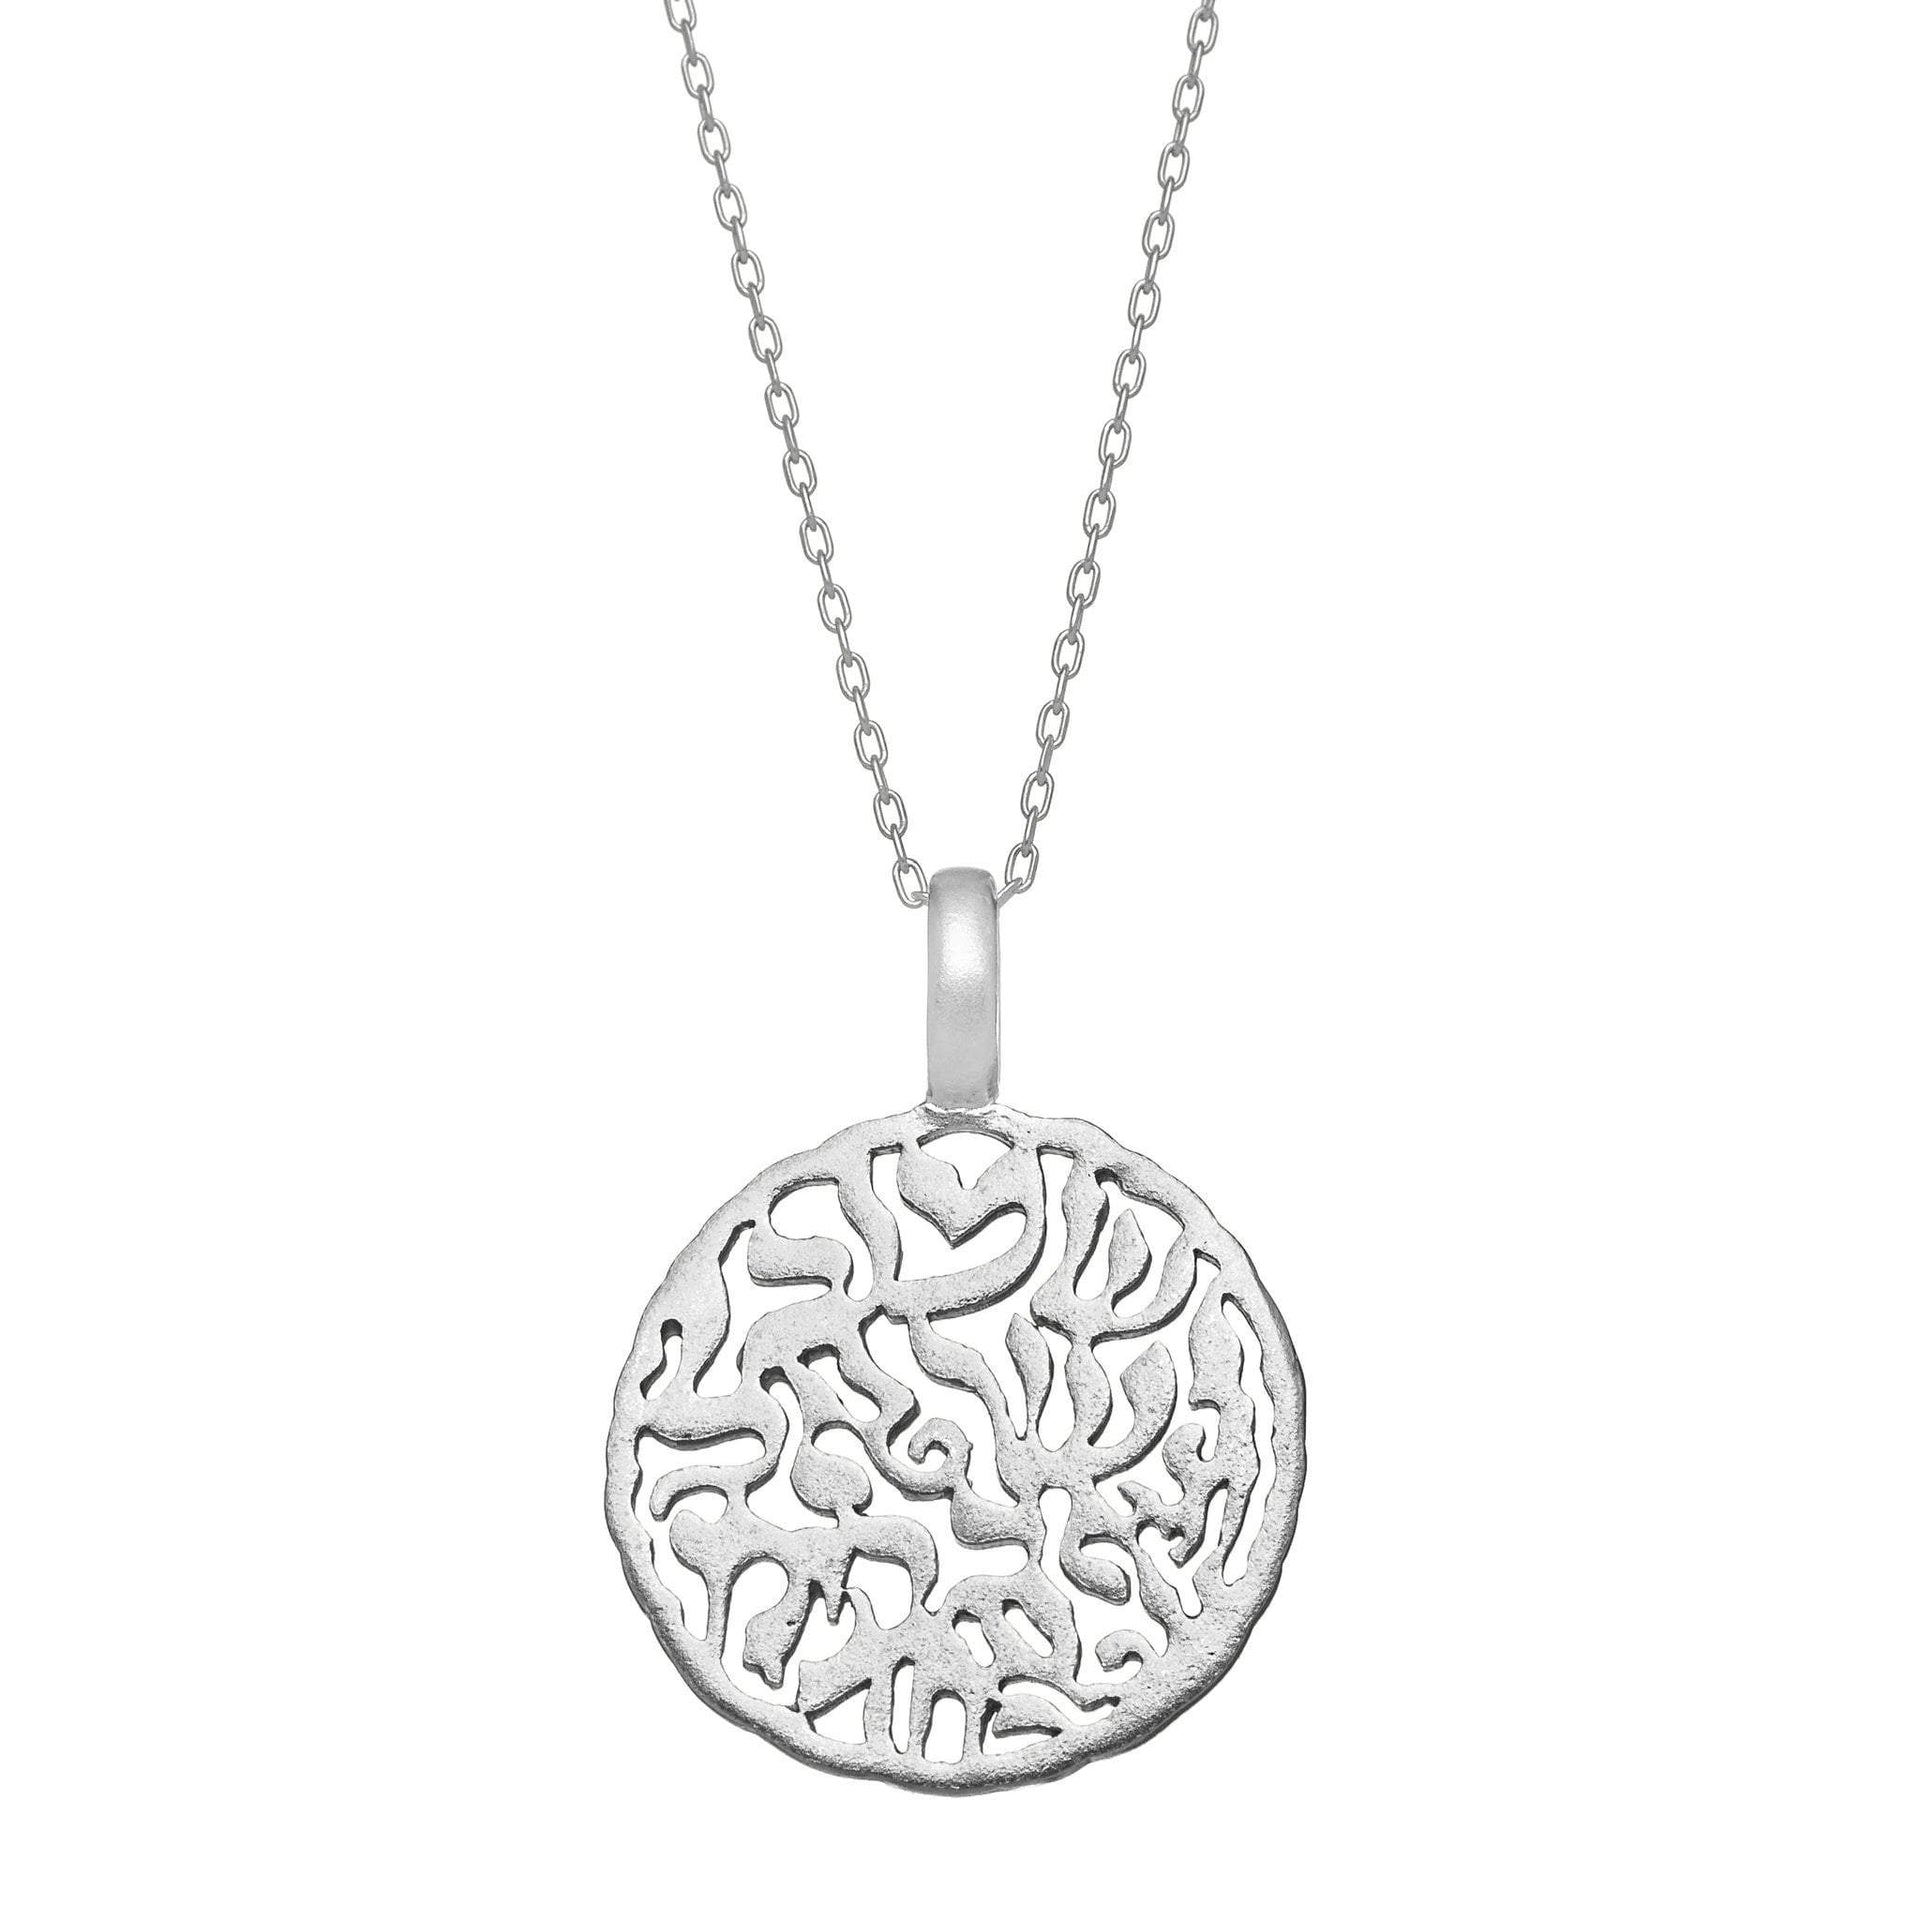 Alef Bet Necklaces Sterling Silver Sterling Silver Shema Pendant